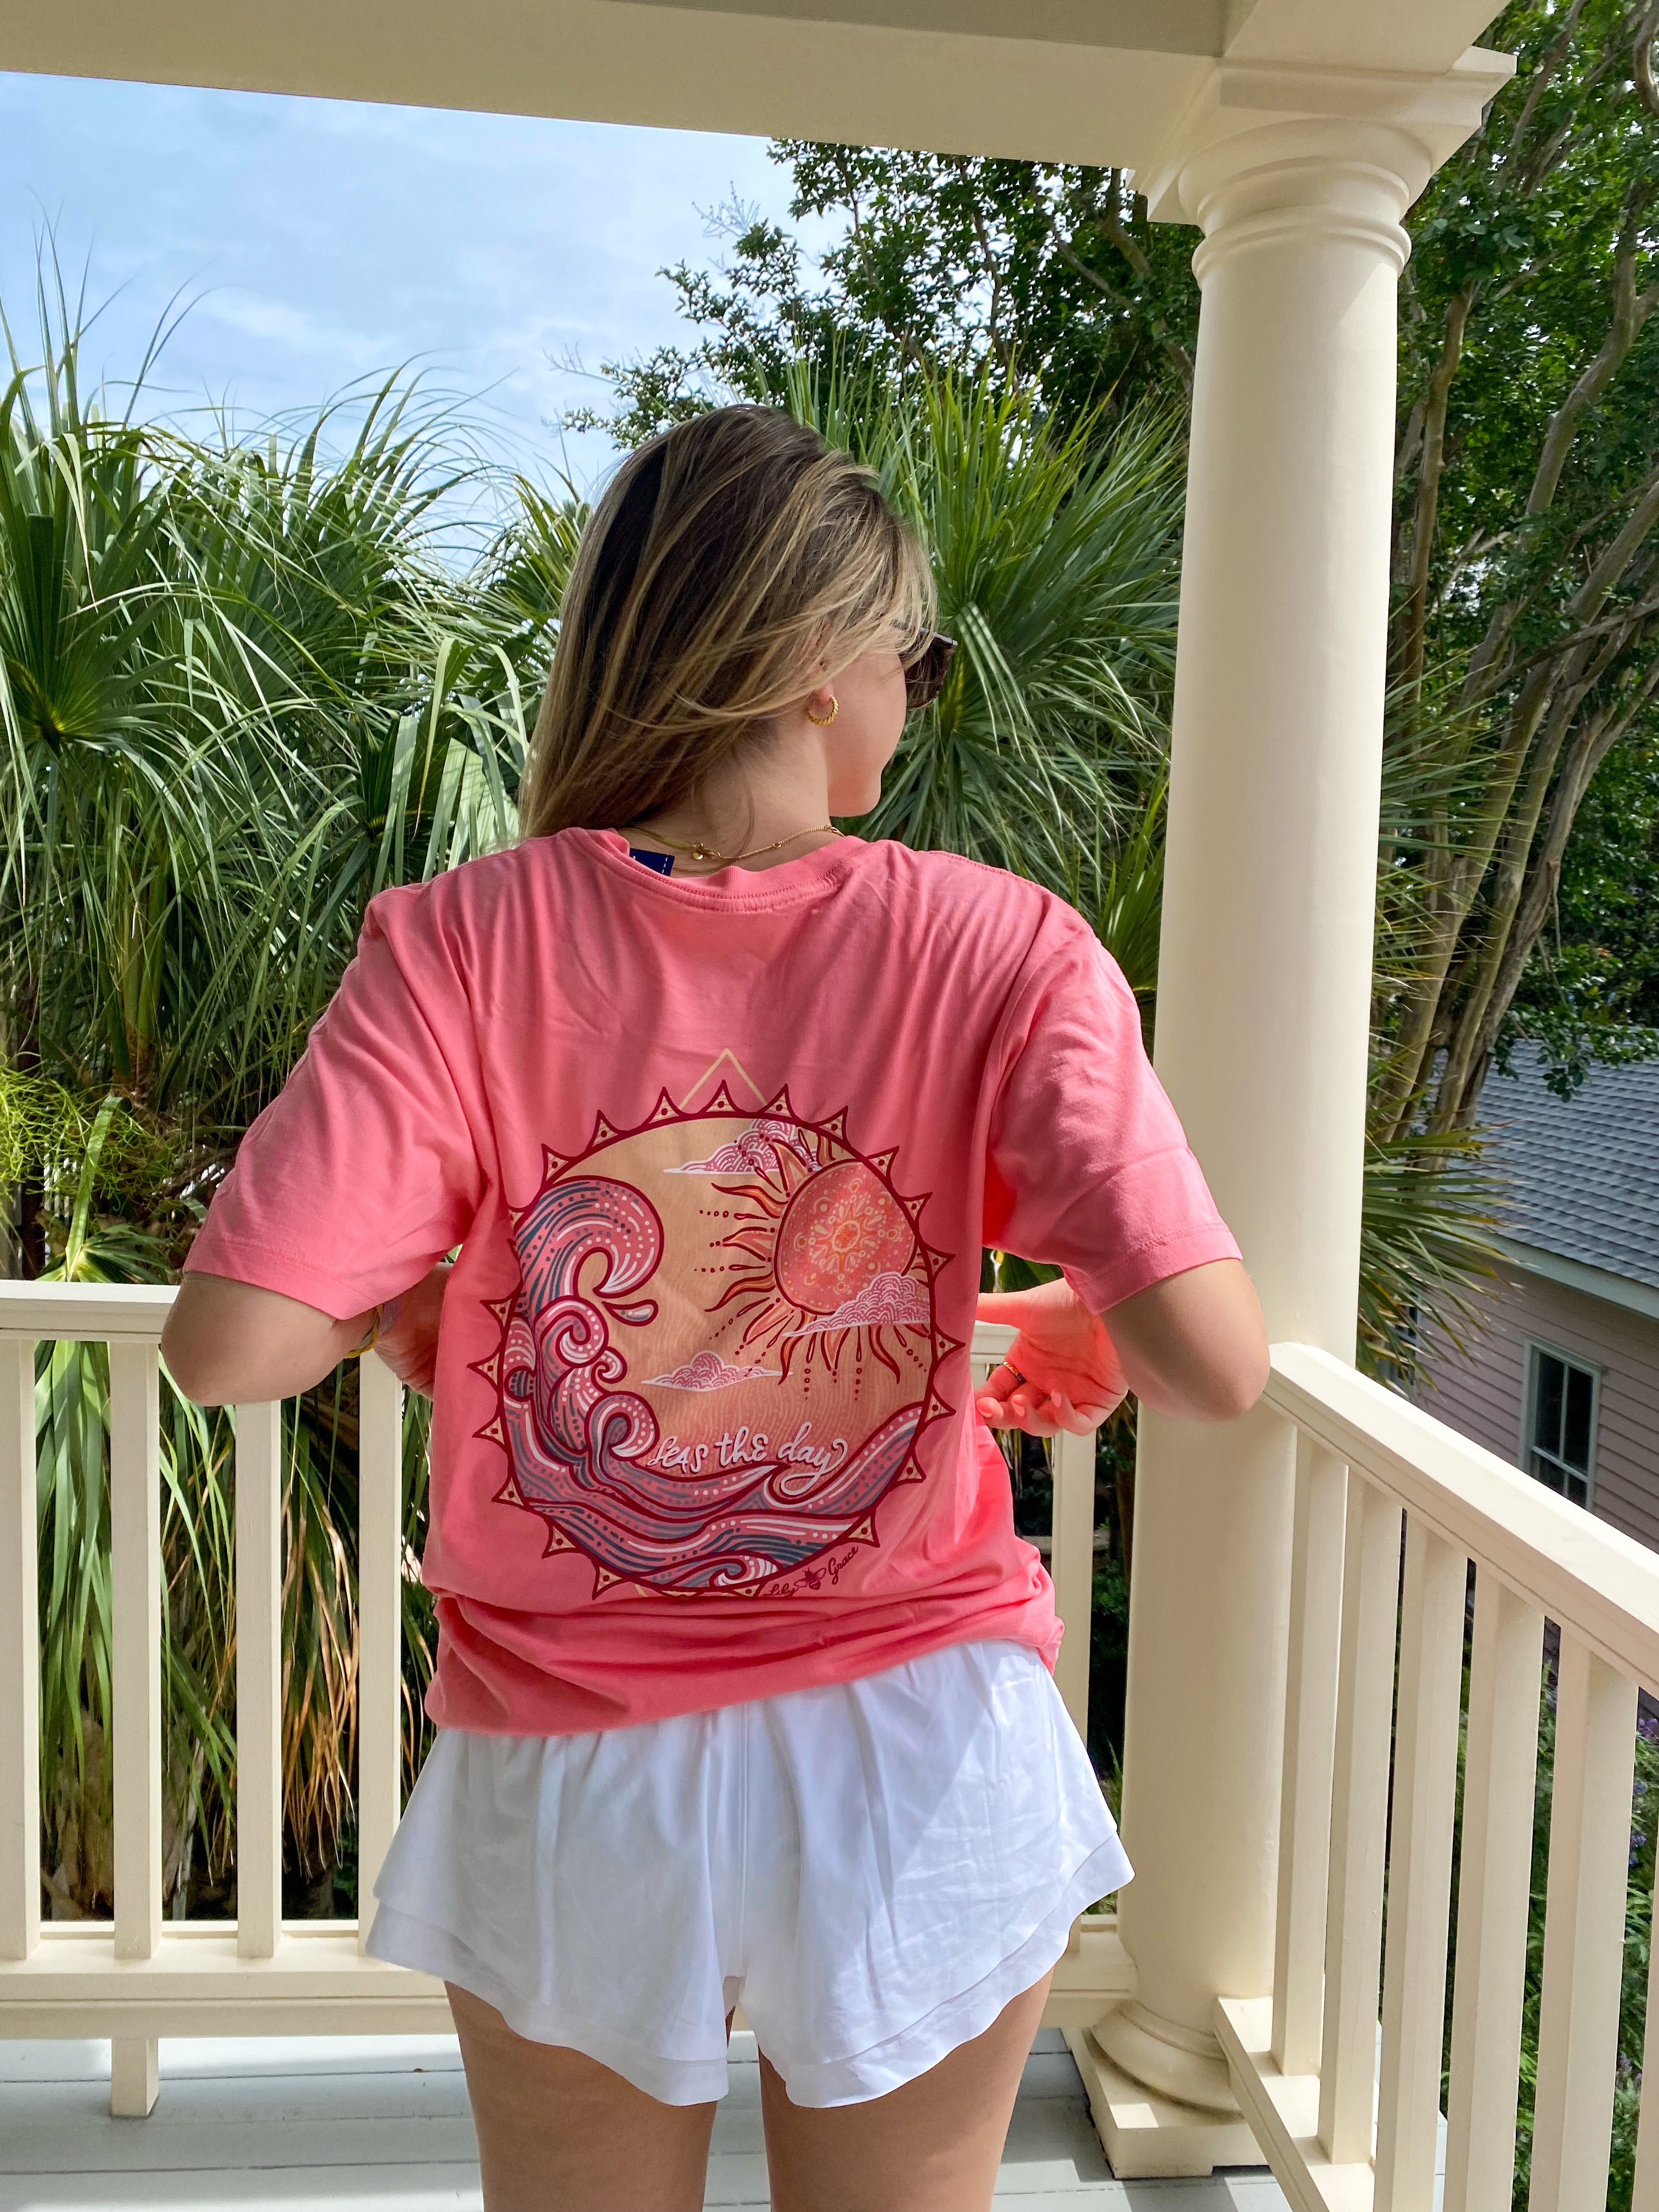 Seas the Day- Waves and Sunshine T-Shirt